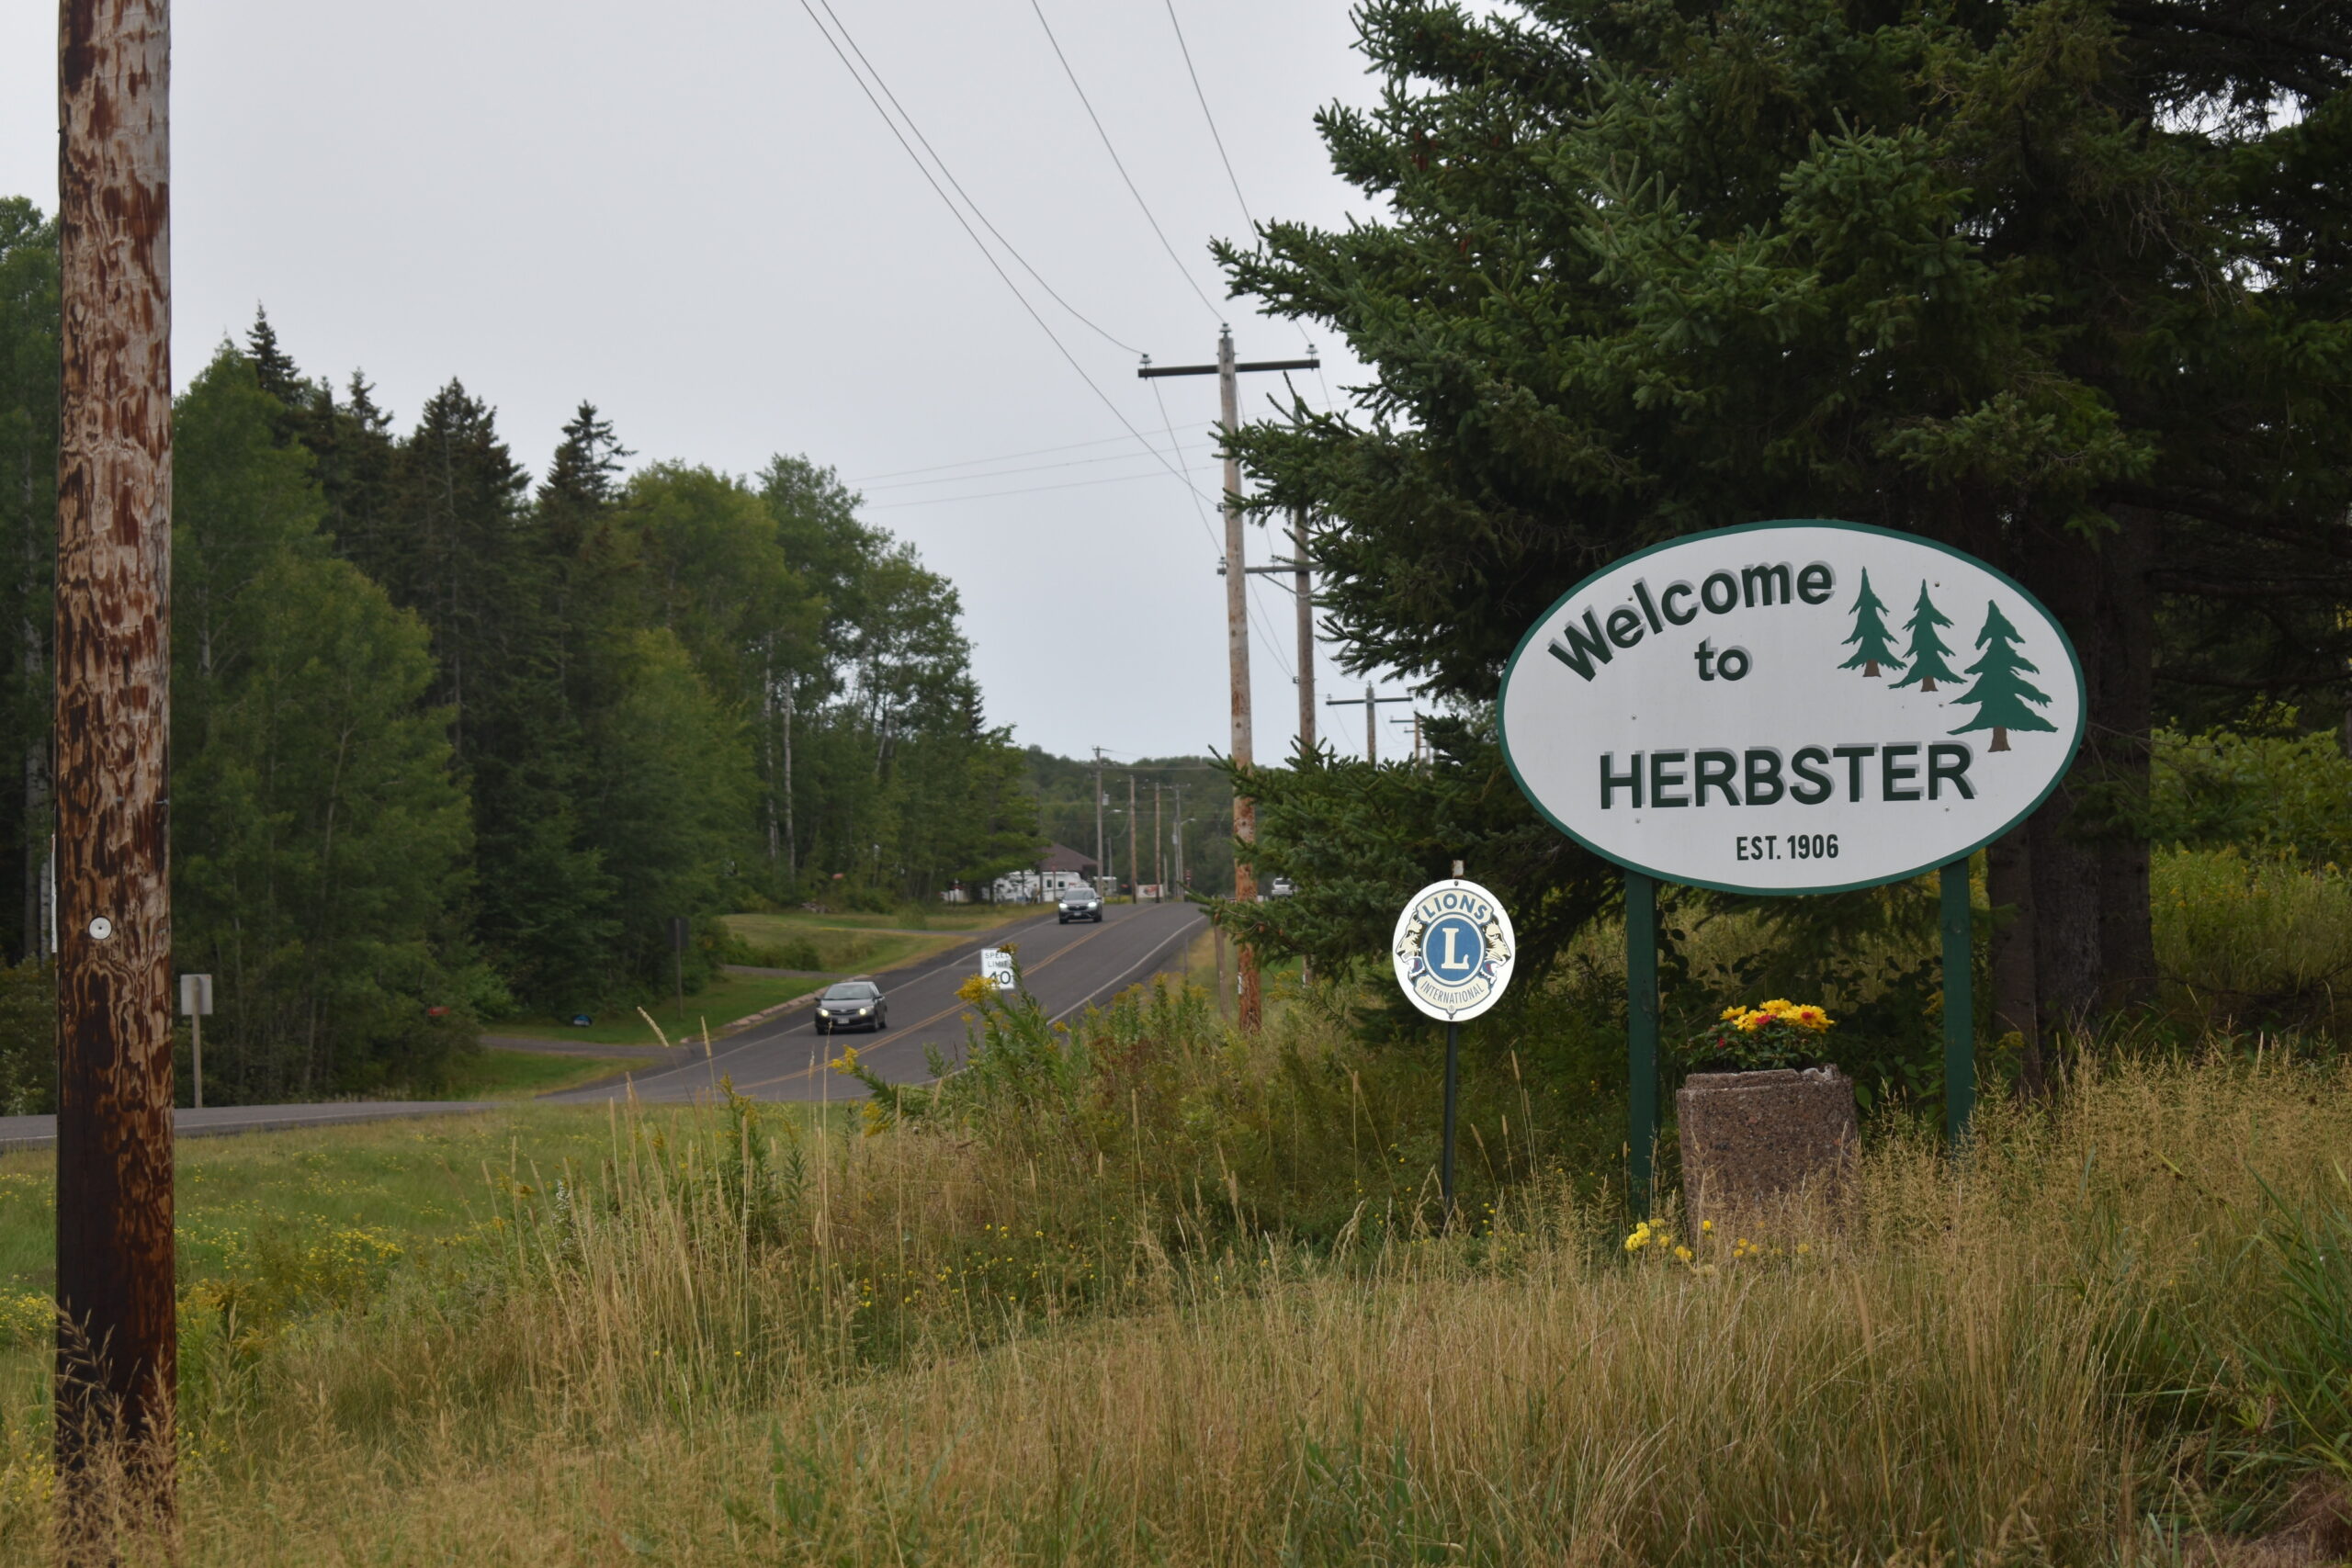 Proposal Seeks To Bottle And Sell Water From Well in Herbster